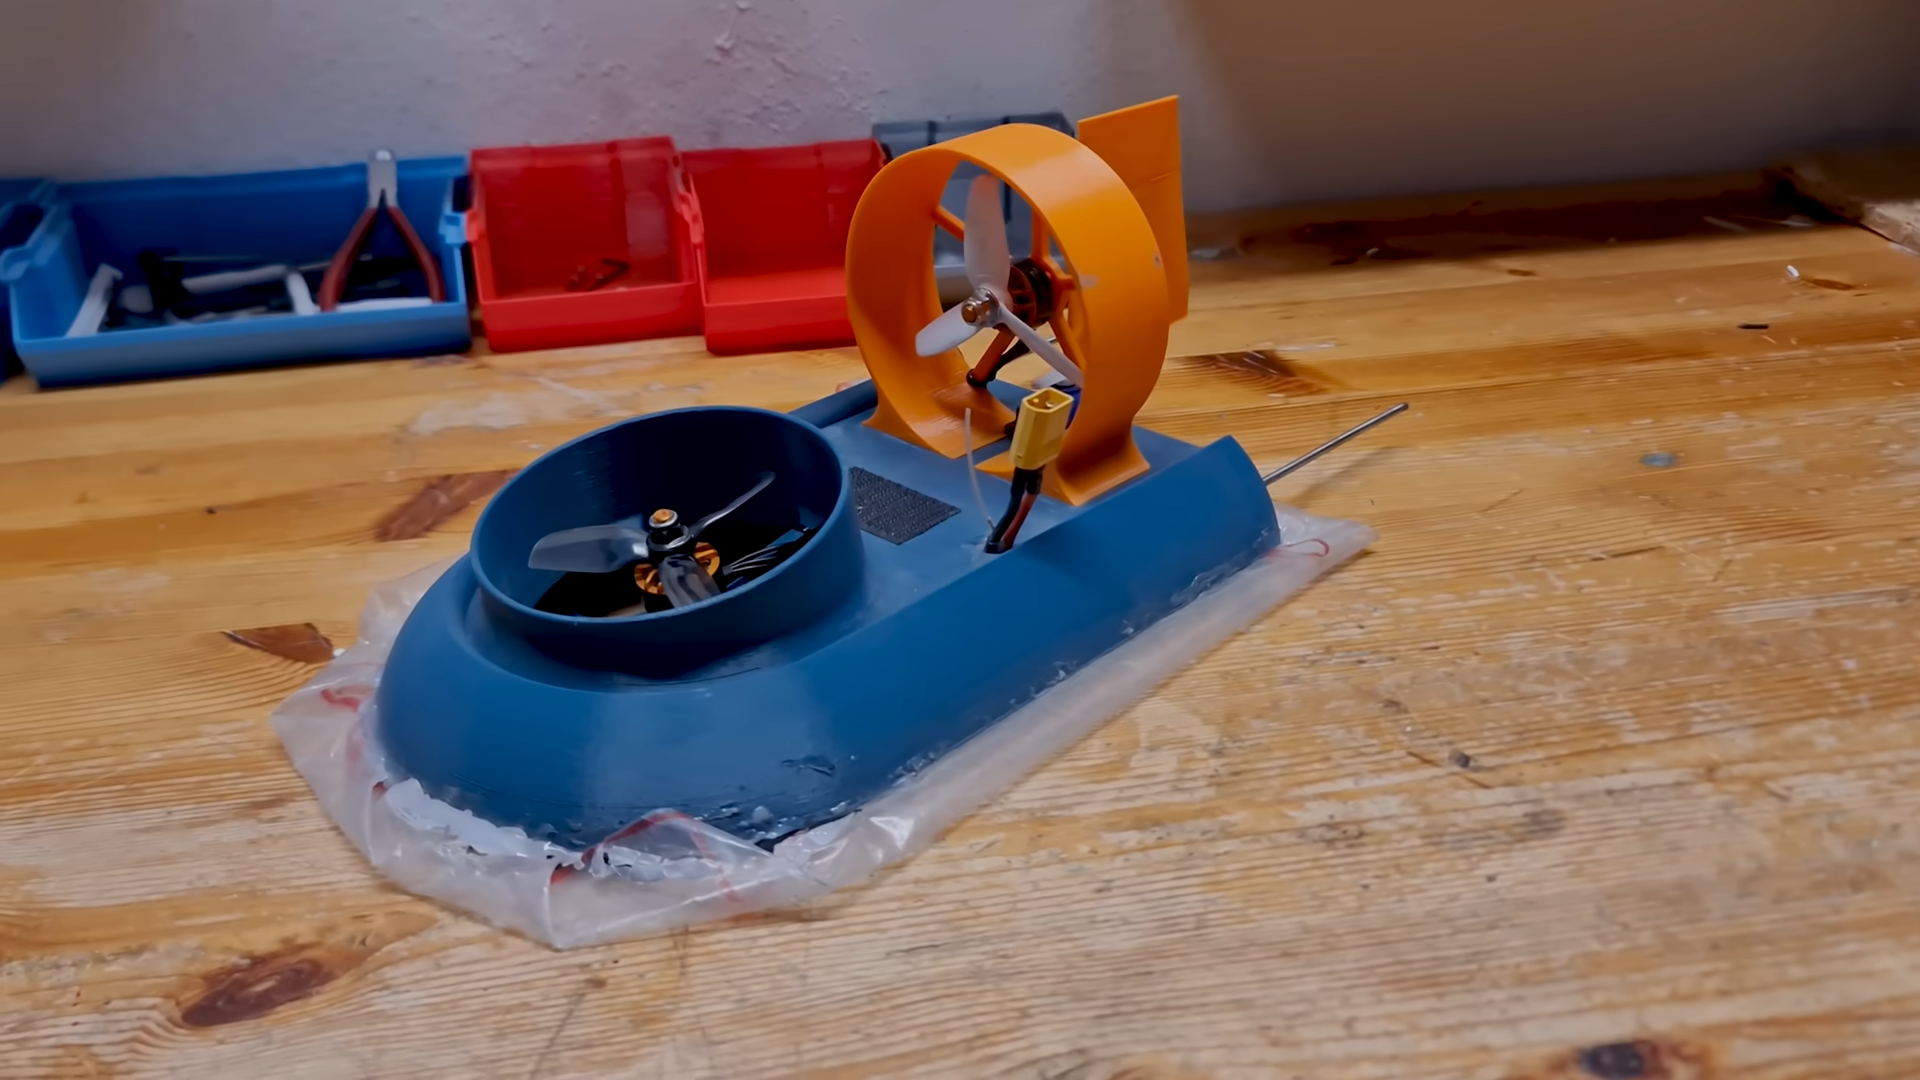 Hotshot’s Mind-blowing 3D Printed Hovercraft Zooms Past Competitors, Leaving Them in Awe